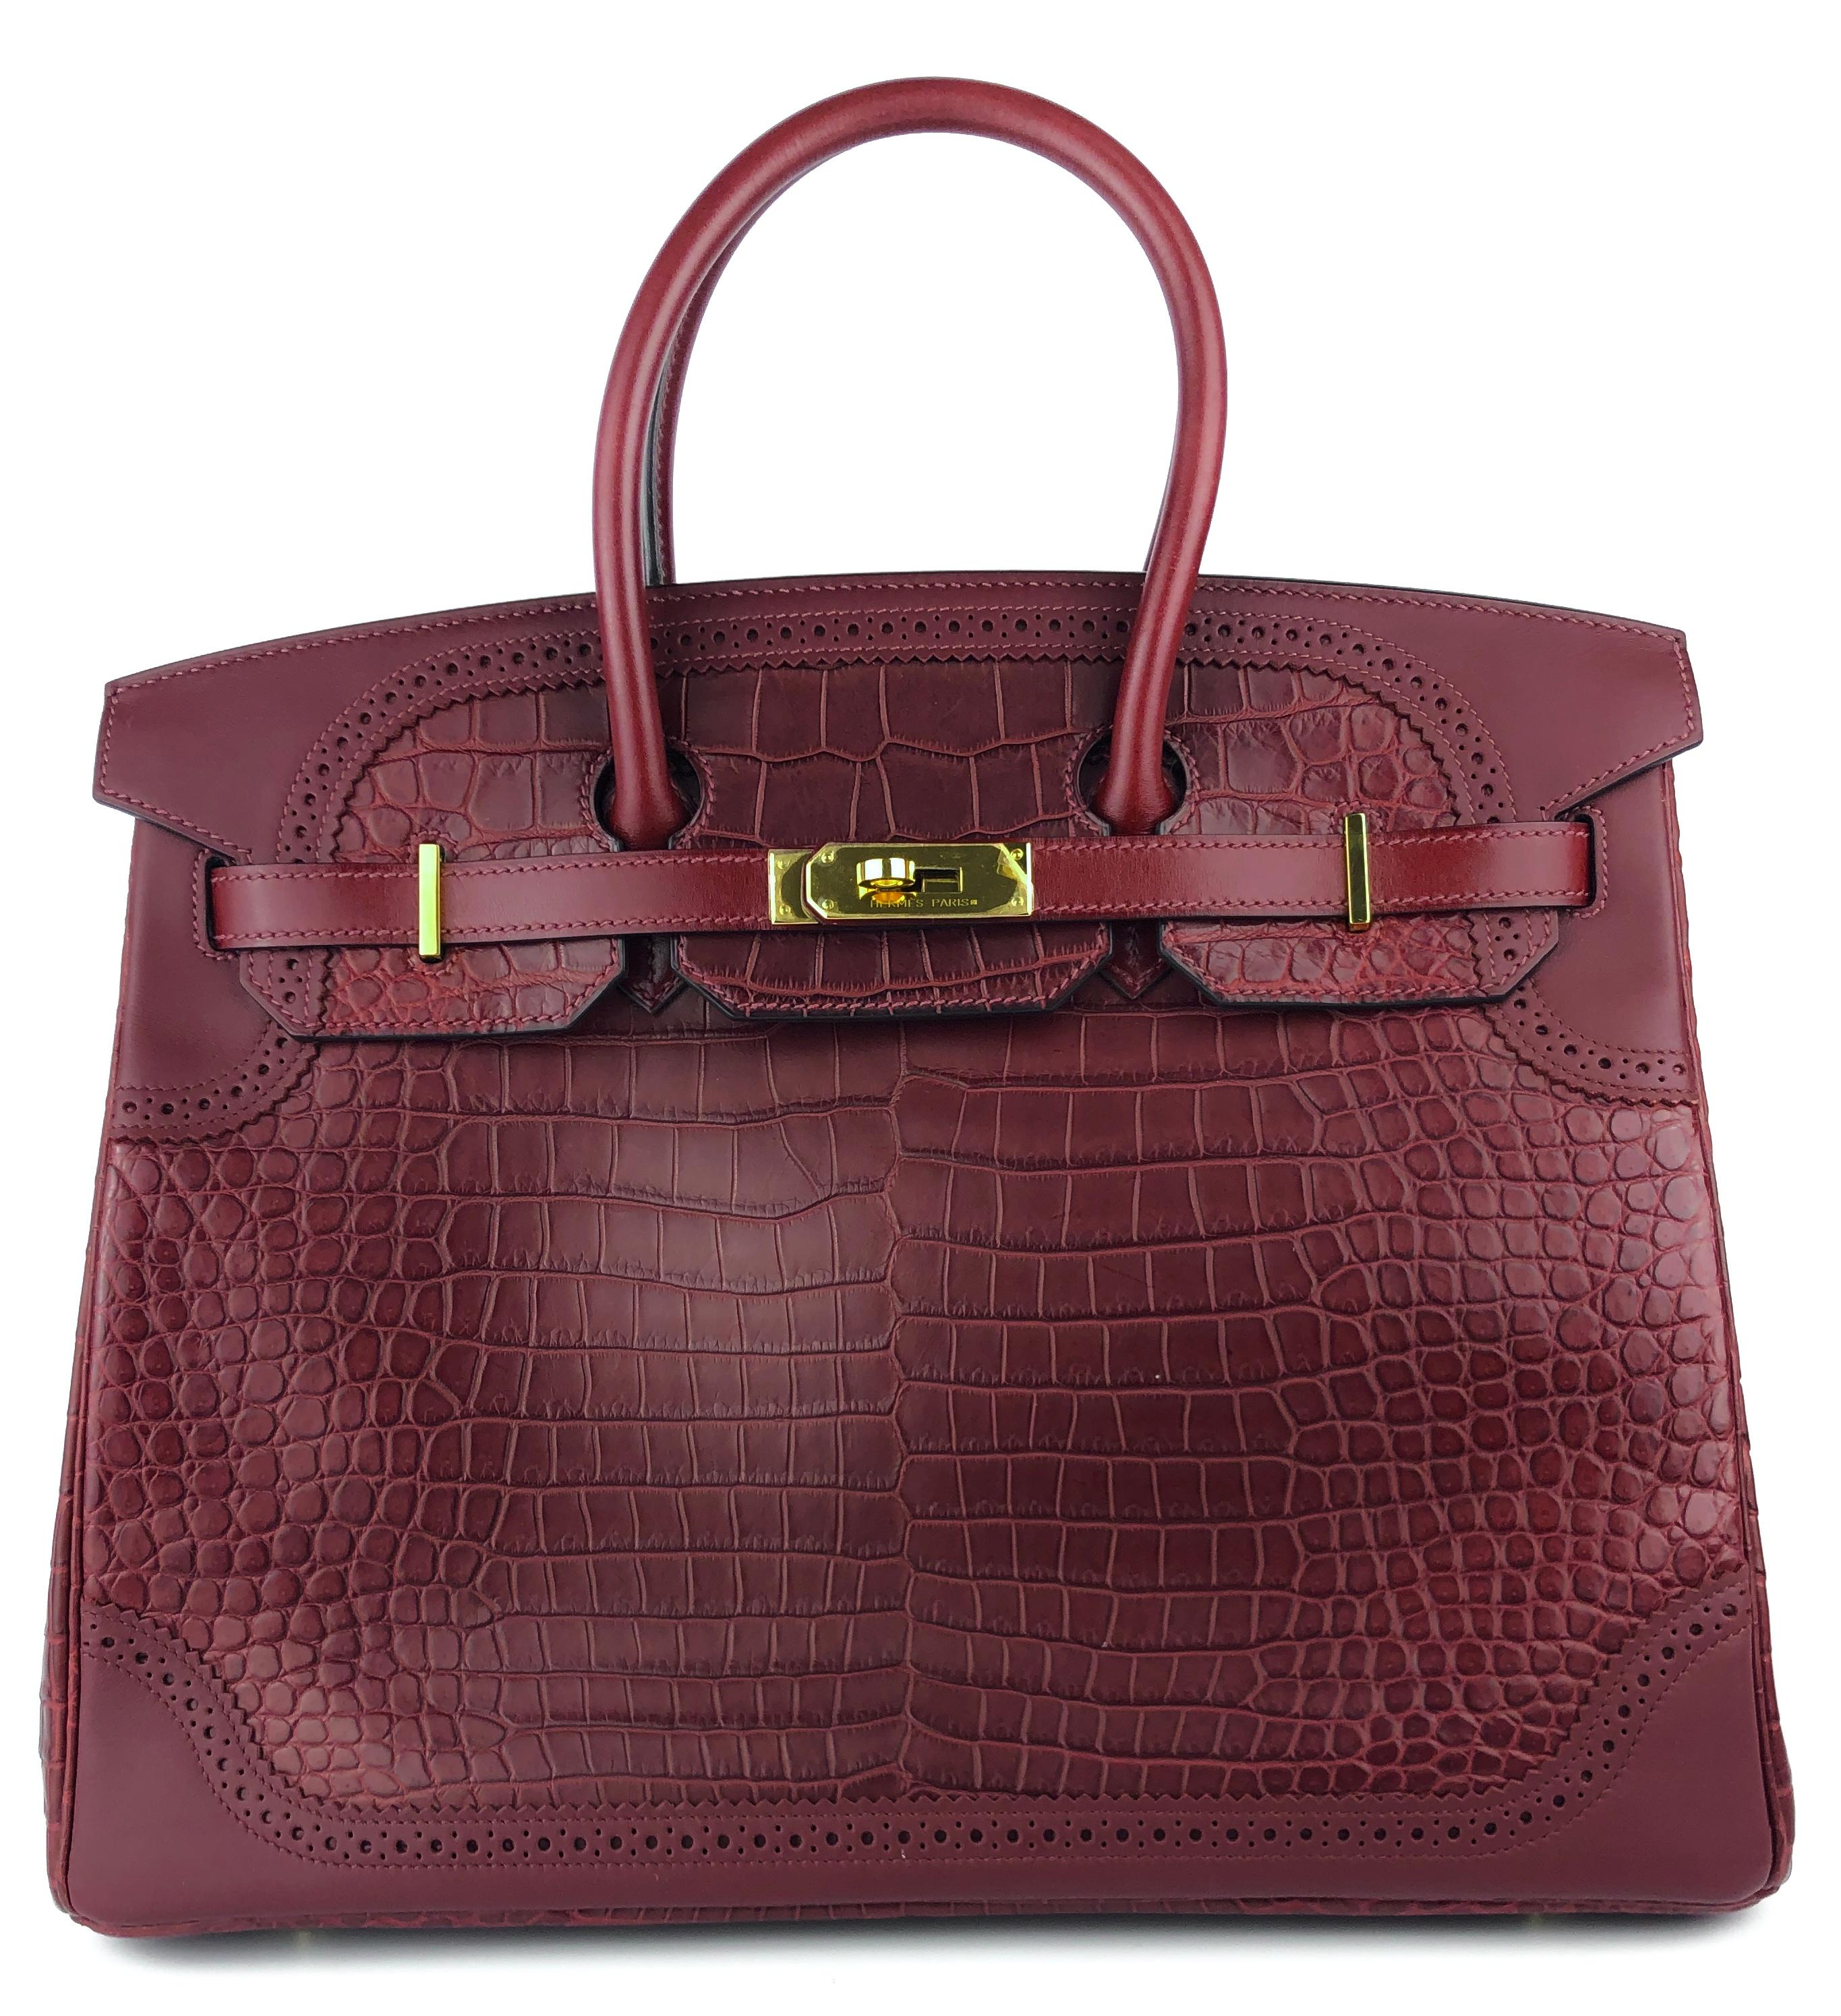 Absolutely Stunning RARE Collectors Piece. Hermes Birkin 35 Ghillies Grand Mirage Matte Alligator Rouge Hand Swift Leather, Blue Interior Leather. Complimented by Gold Hardware. Pristine Condition, Plastic on hardware, excellent structure and